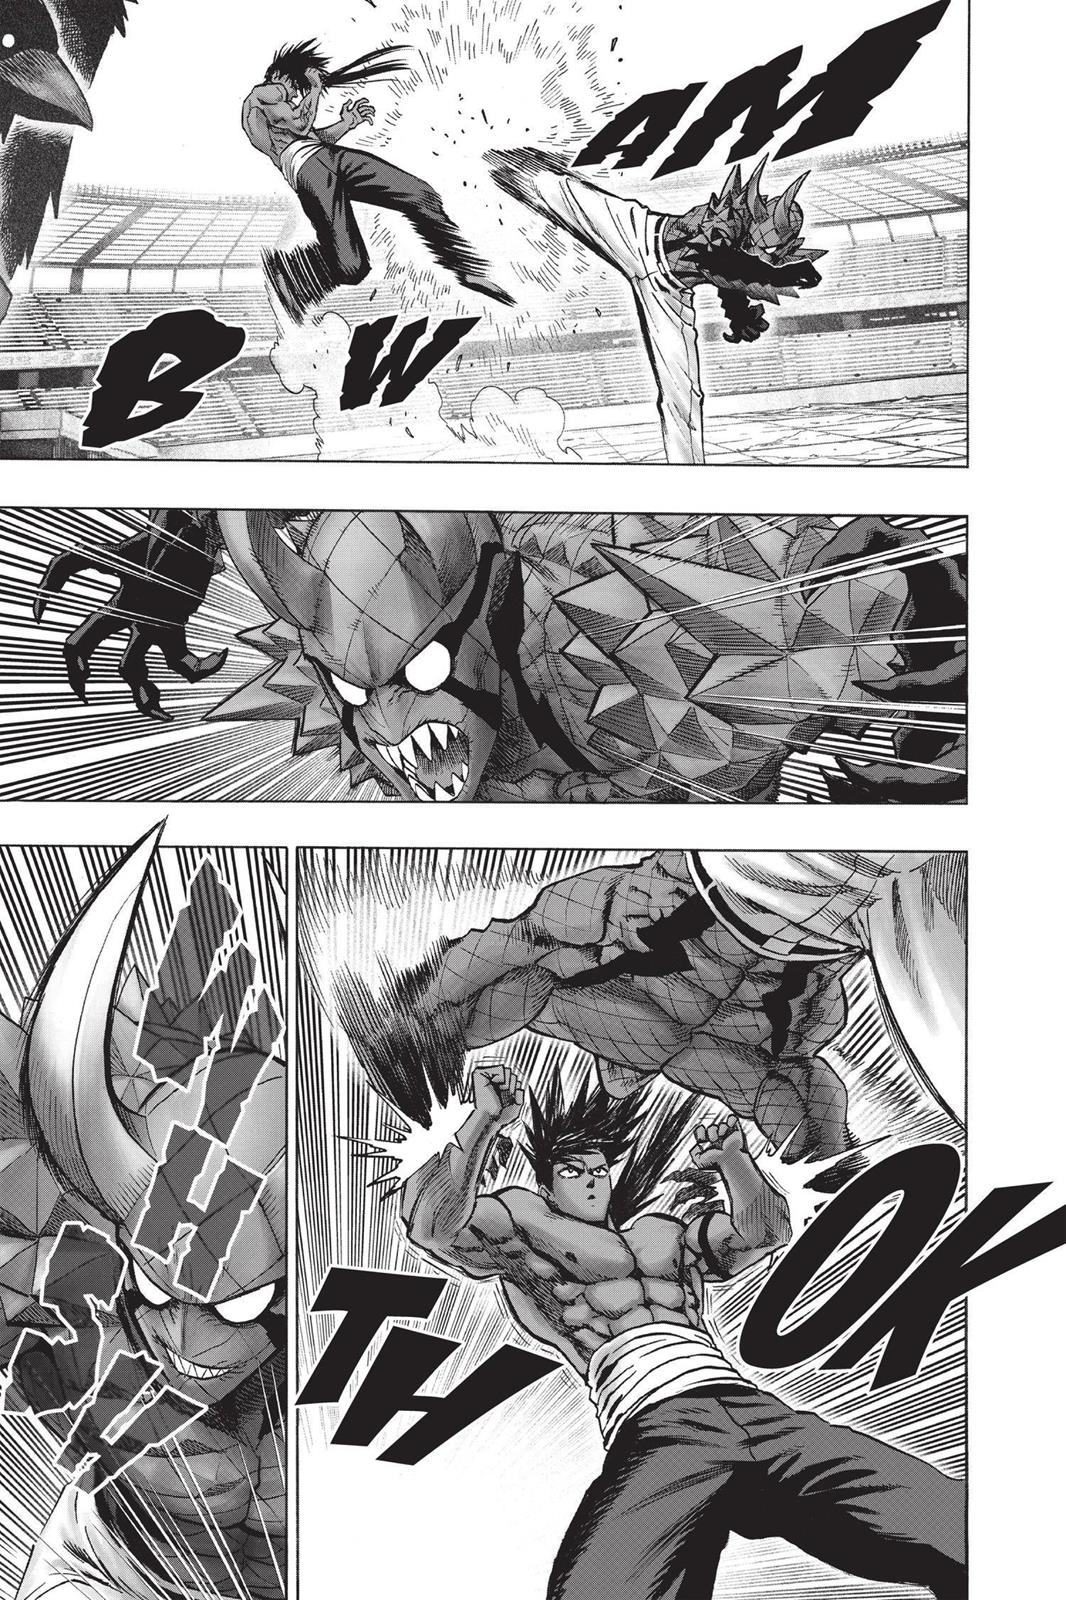 One-Punch Man, Punch 72 image 41